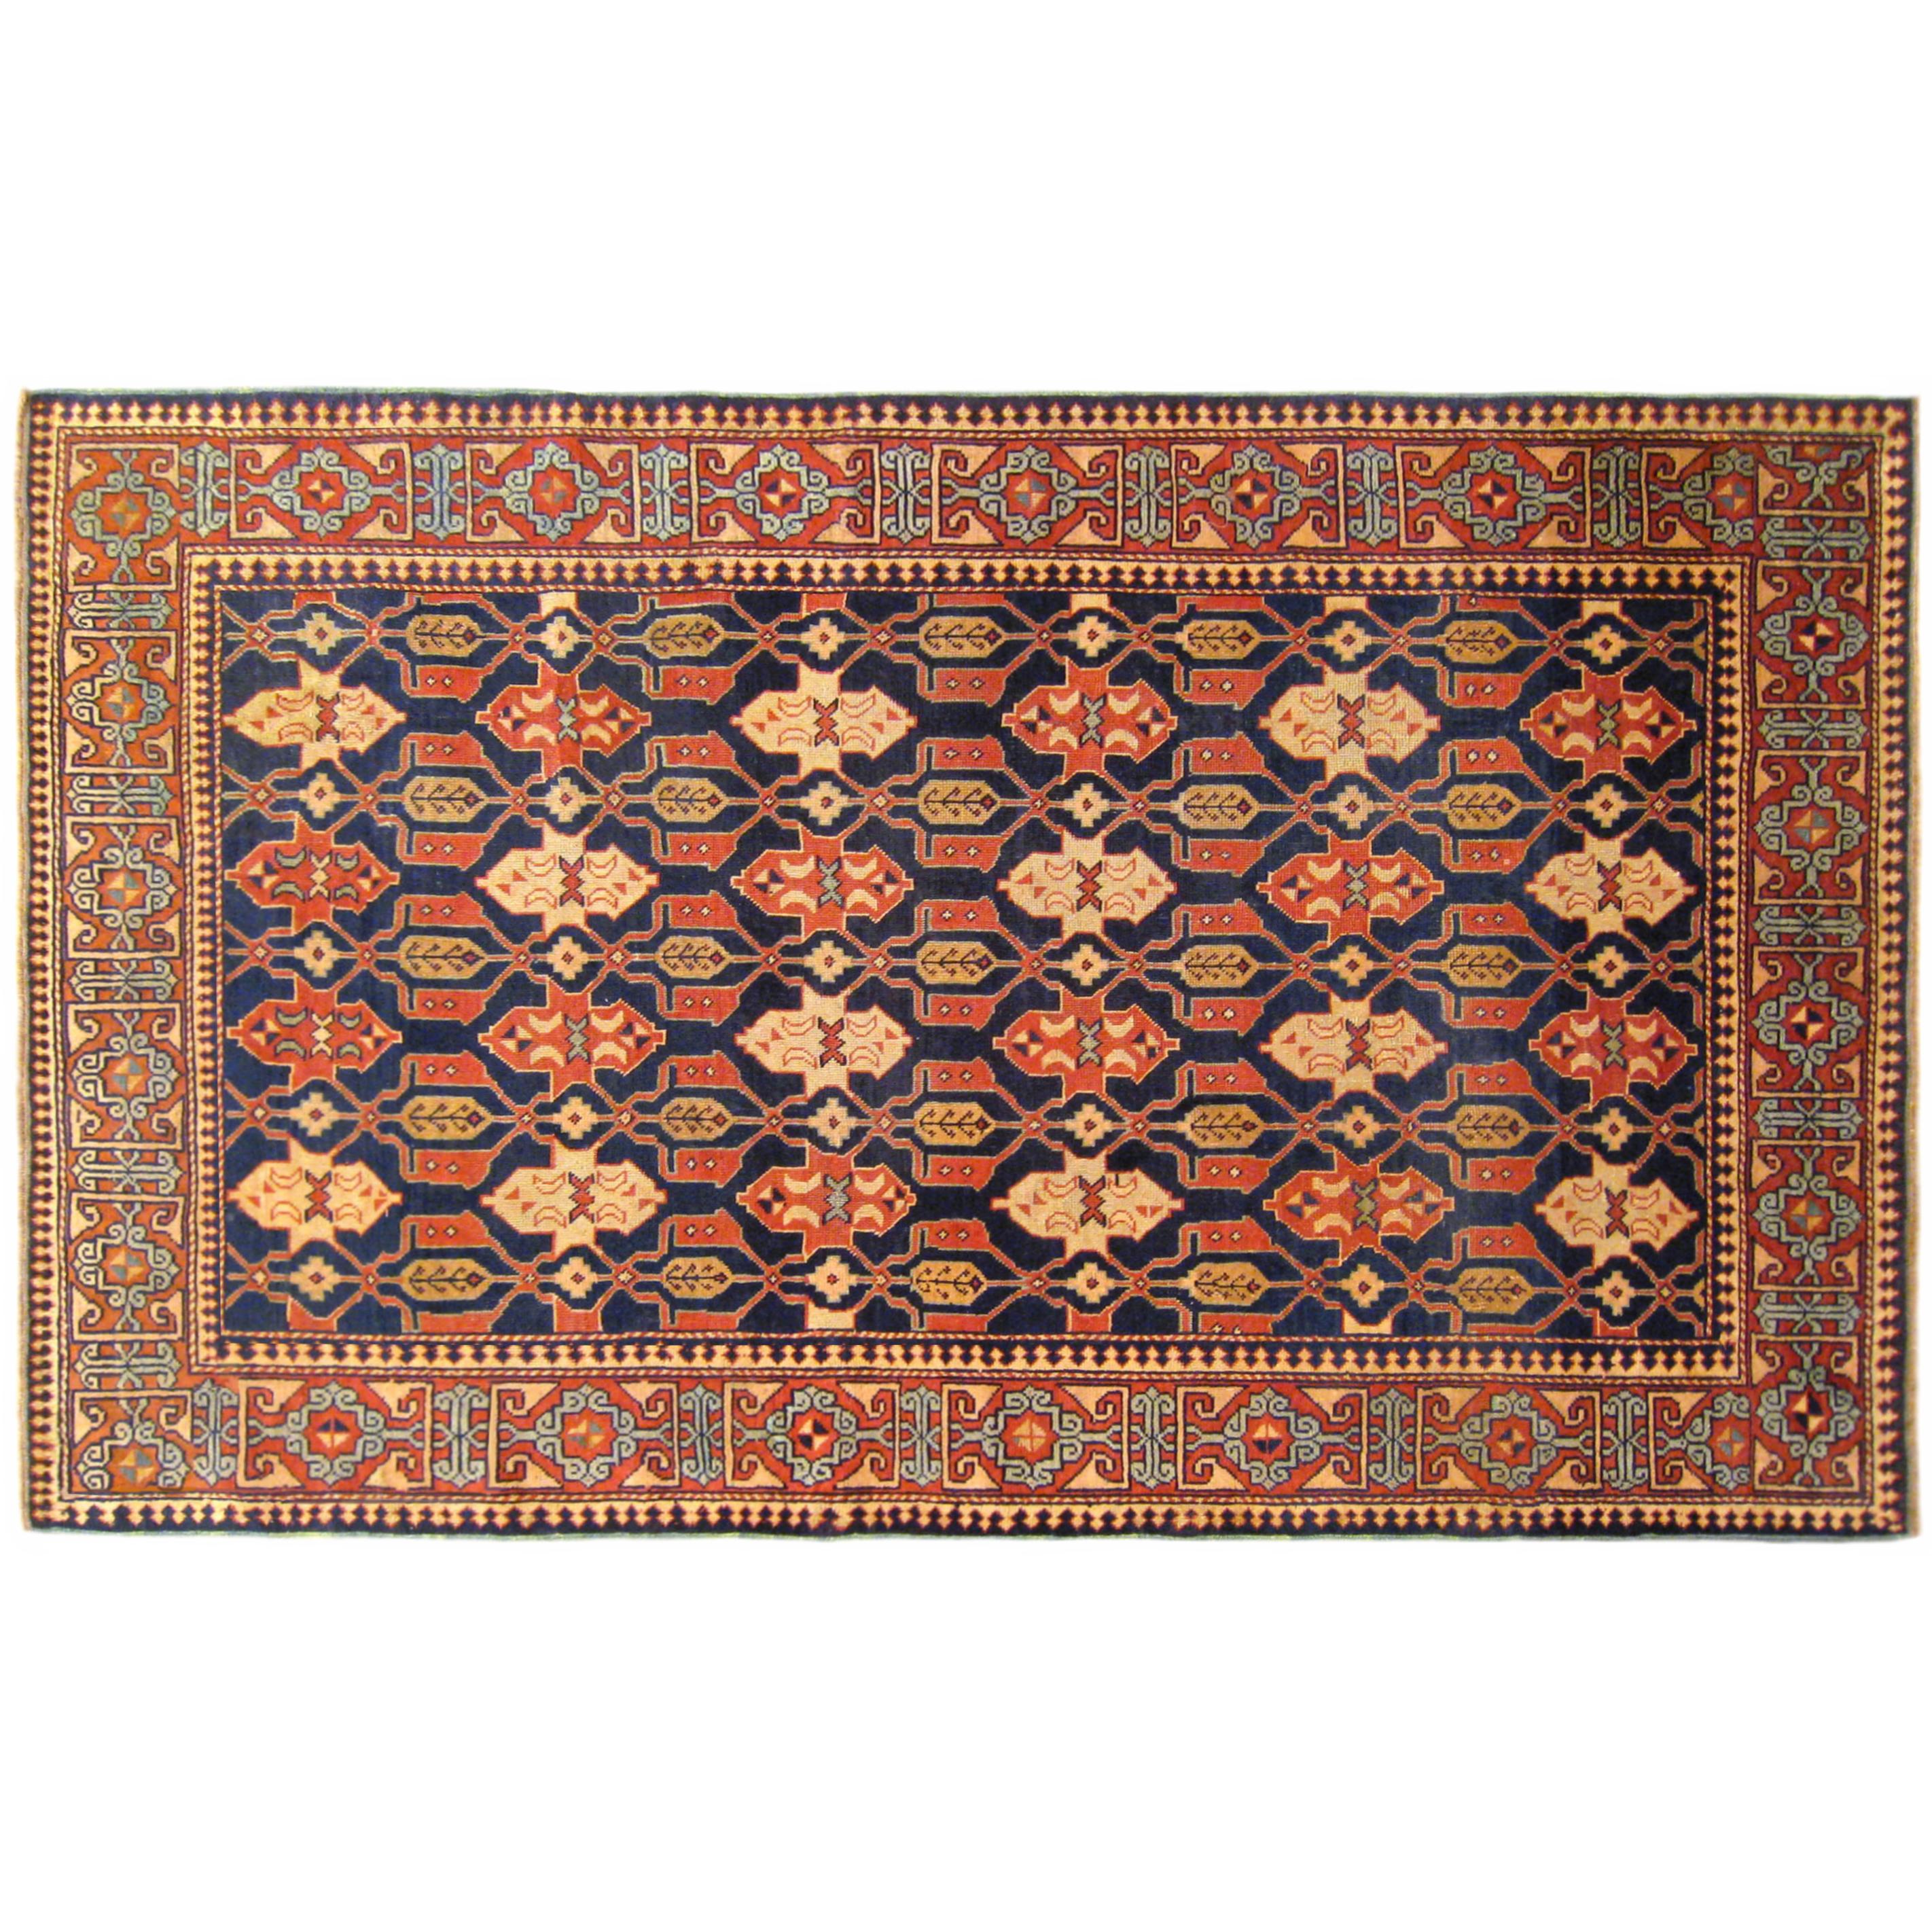 Antique Caucasian Kuba Oriental Rug in Small Size with Repeat Design, Blue Field